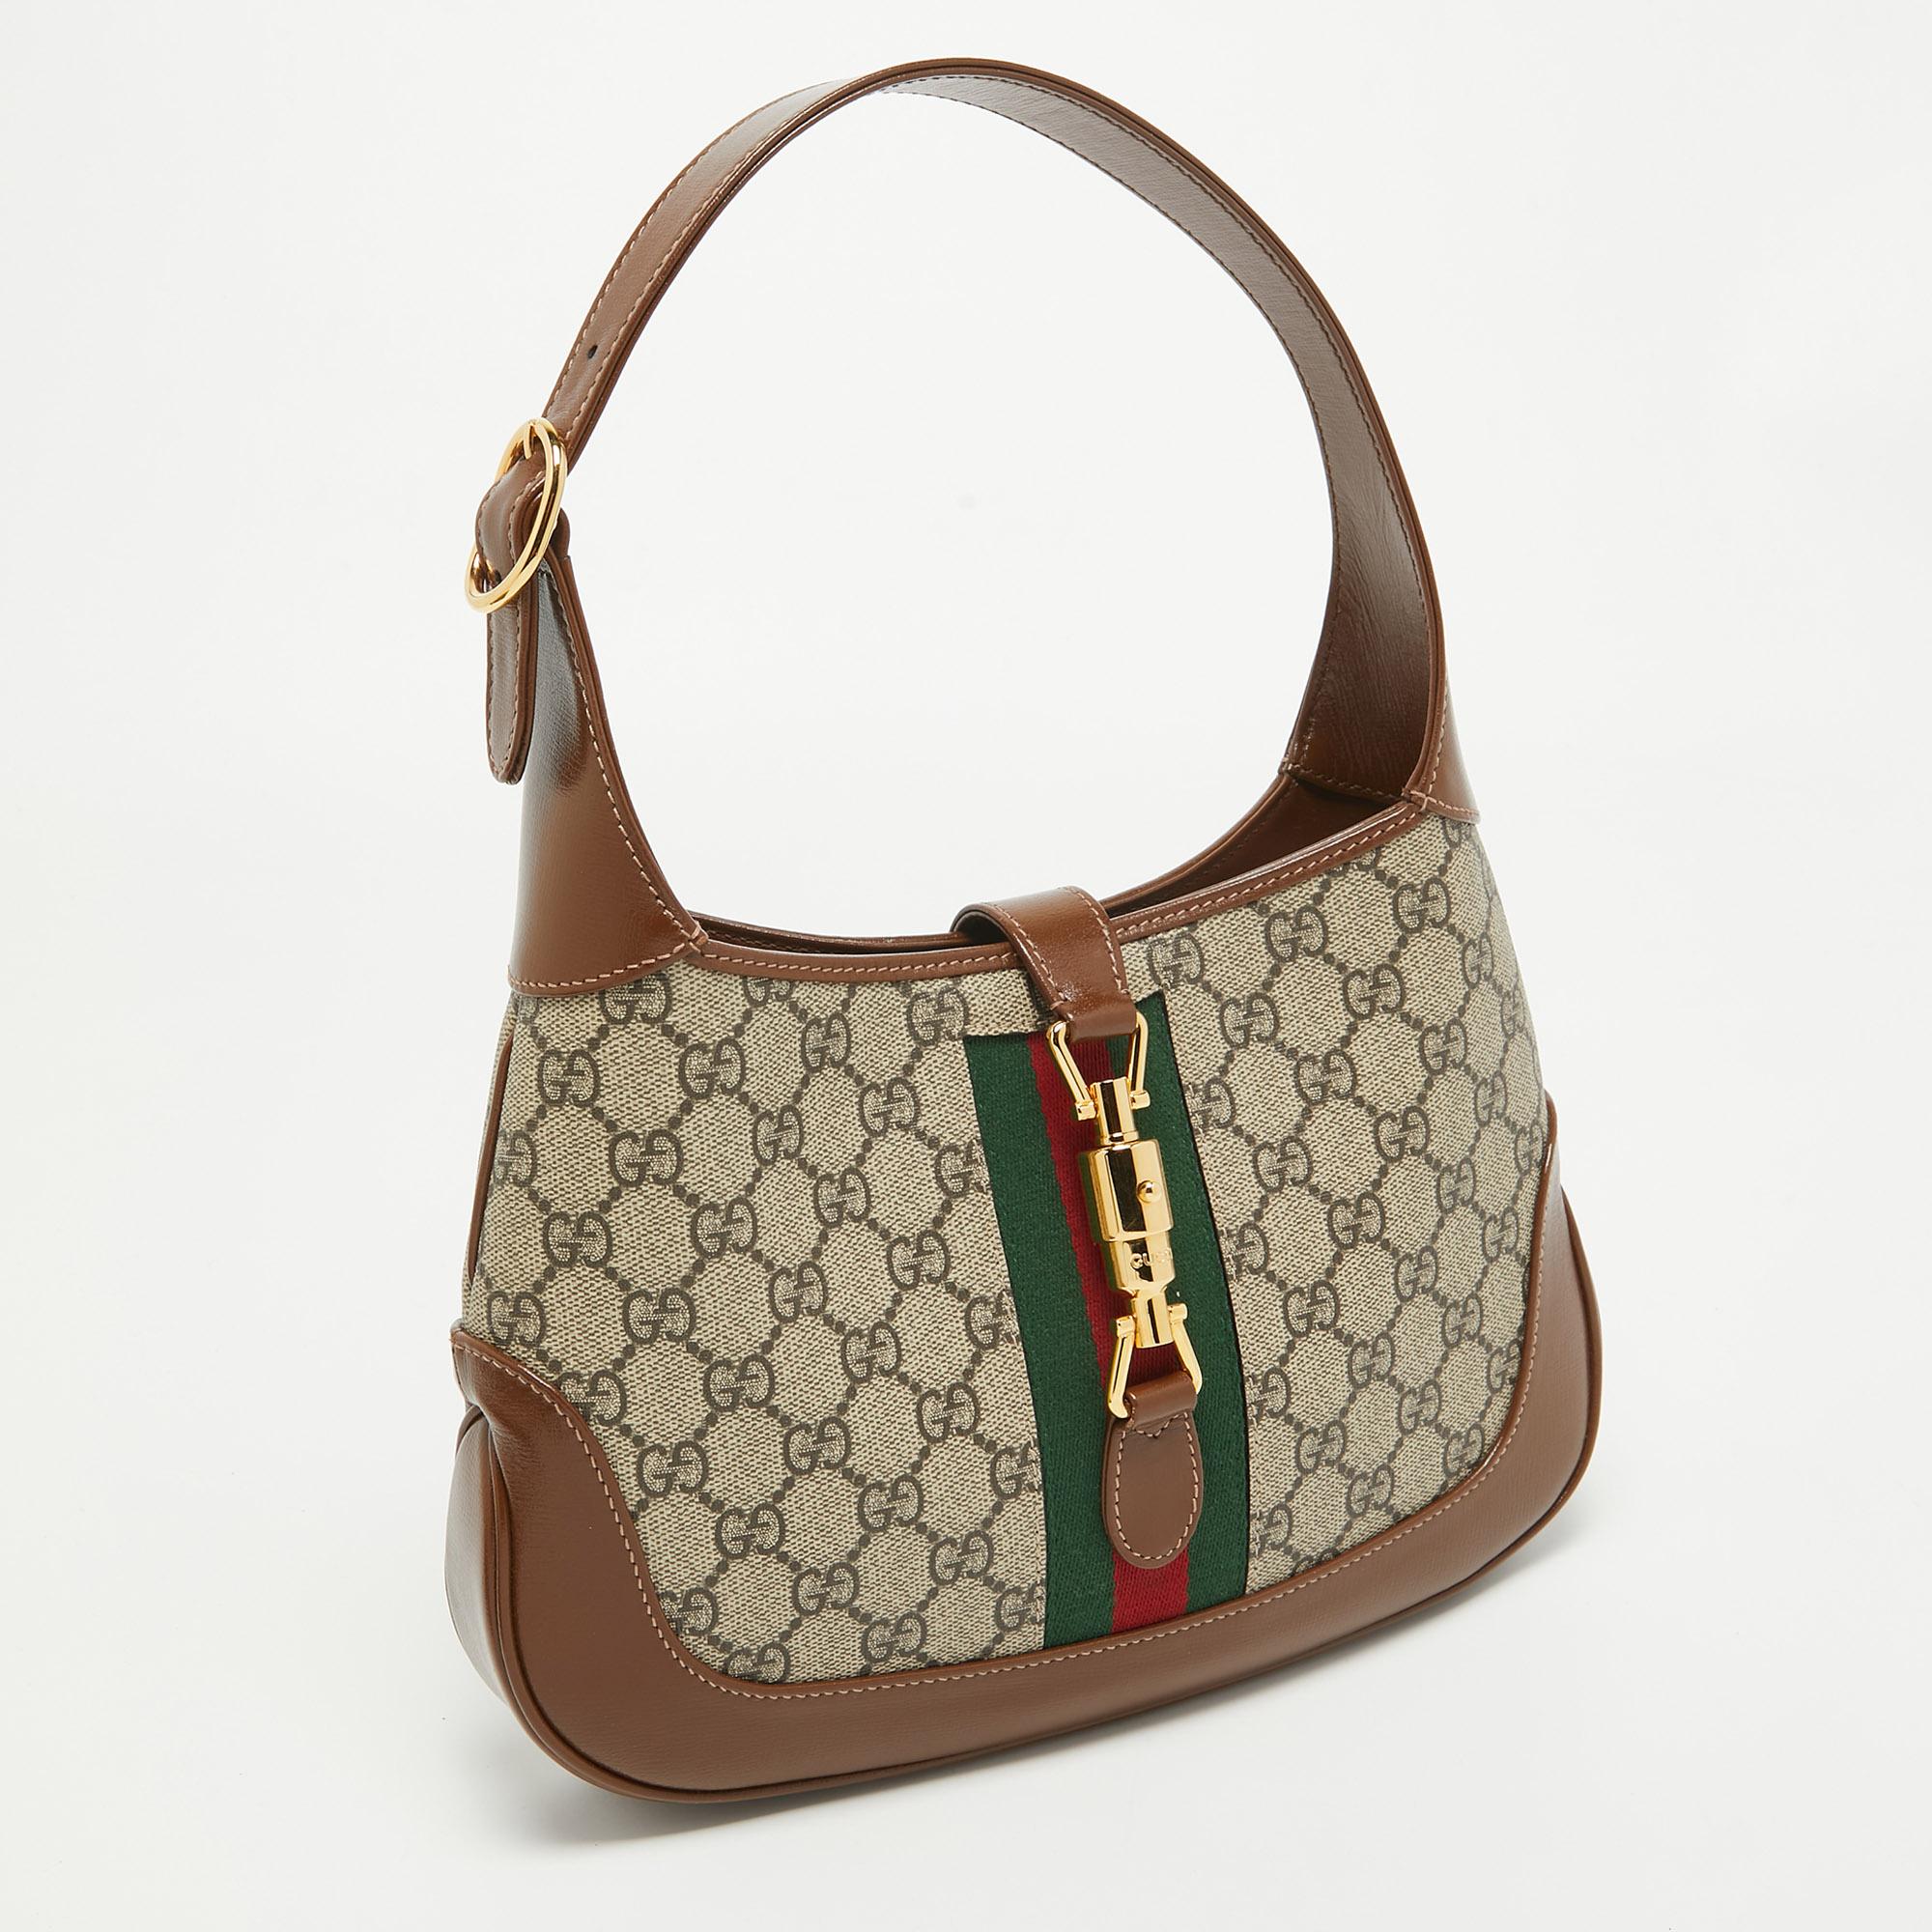 The Gucci Jackie 1961 Hobo exudes timeless elegance. Crafted with the signature GG Supreme canvas and luxe leather, it features the iconic piston closure and a comfortable shoulder strap. Its compact size makes it perfect for carrying essentials